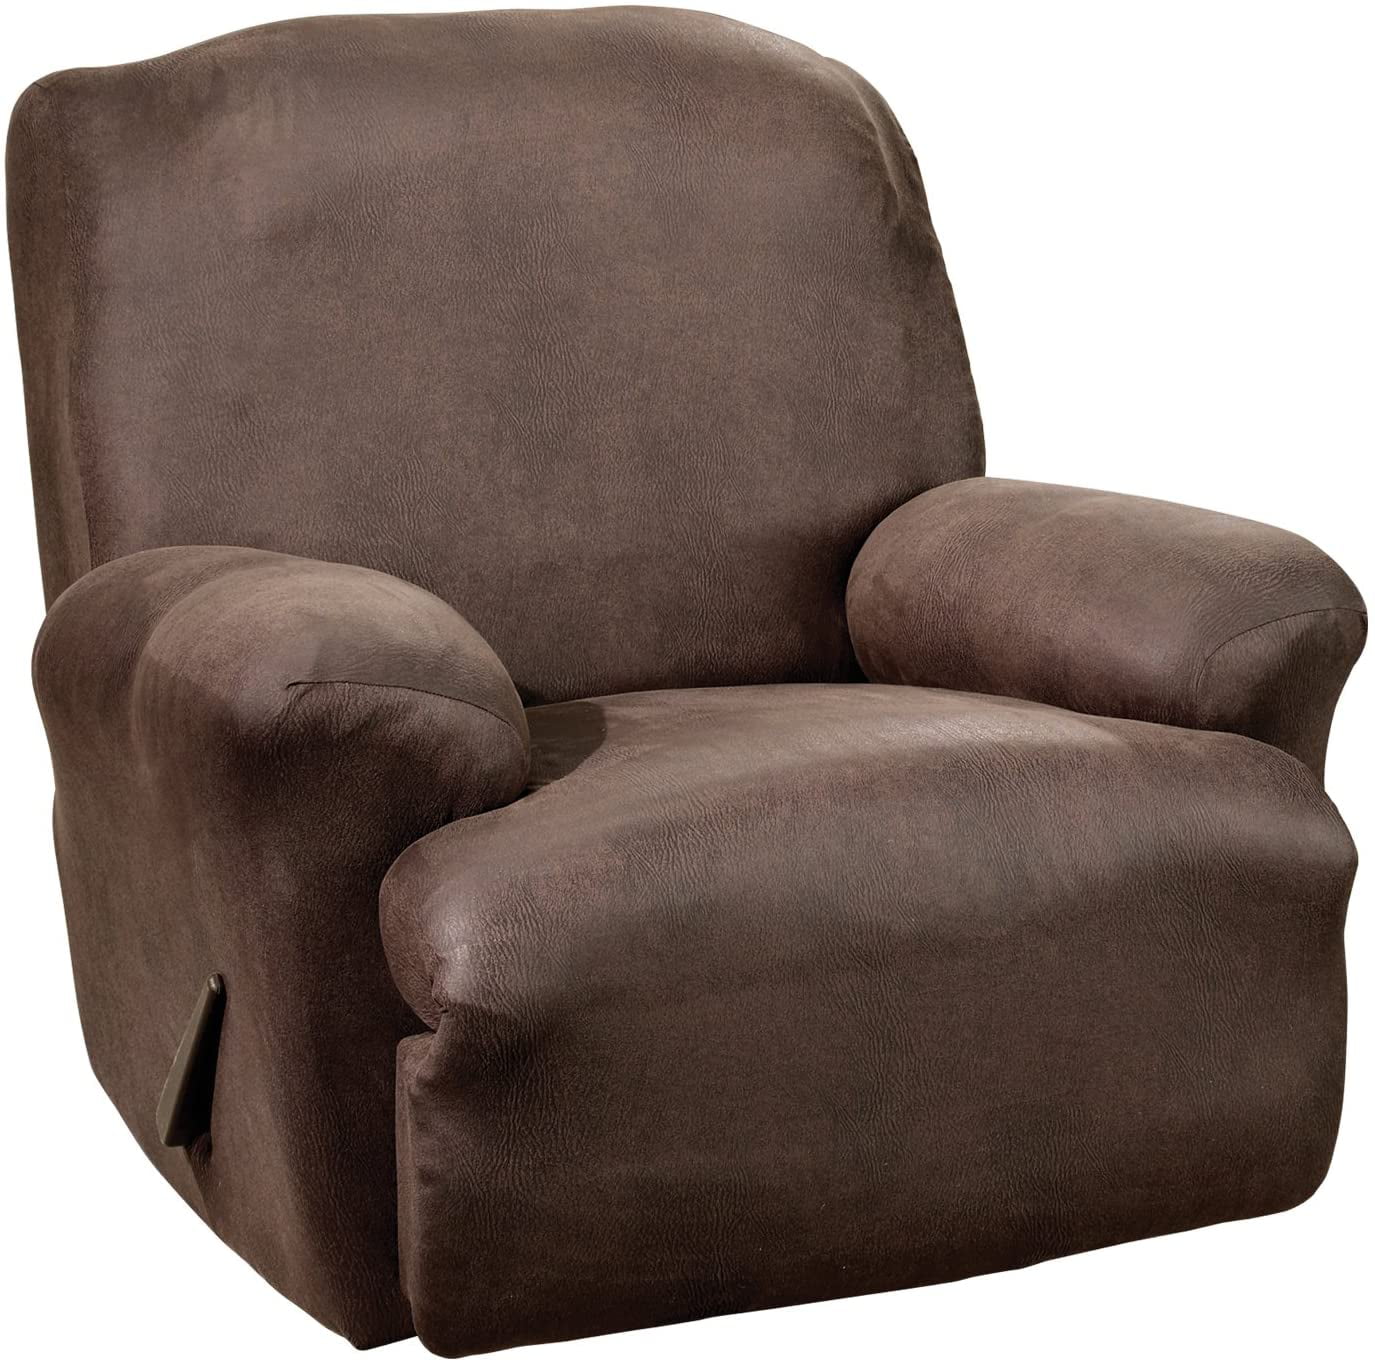 Sure Fit Stretch Leather Recliner, Can You Recover A Leather Recliner